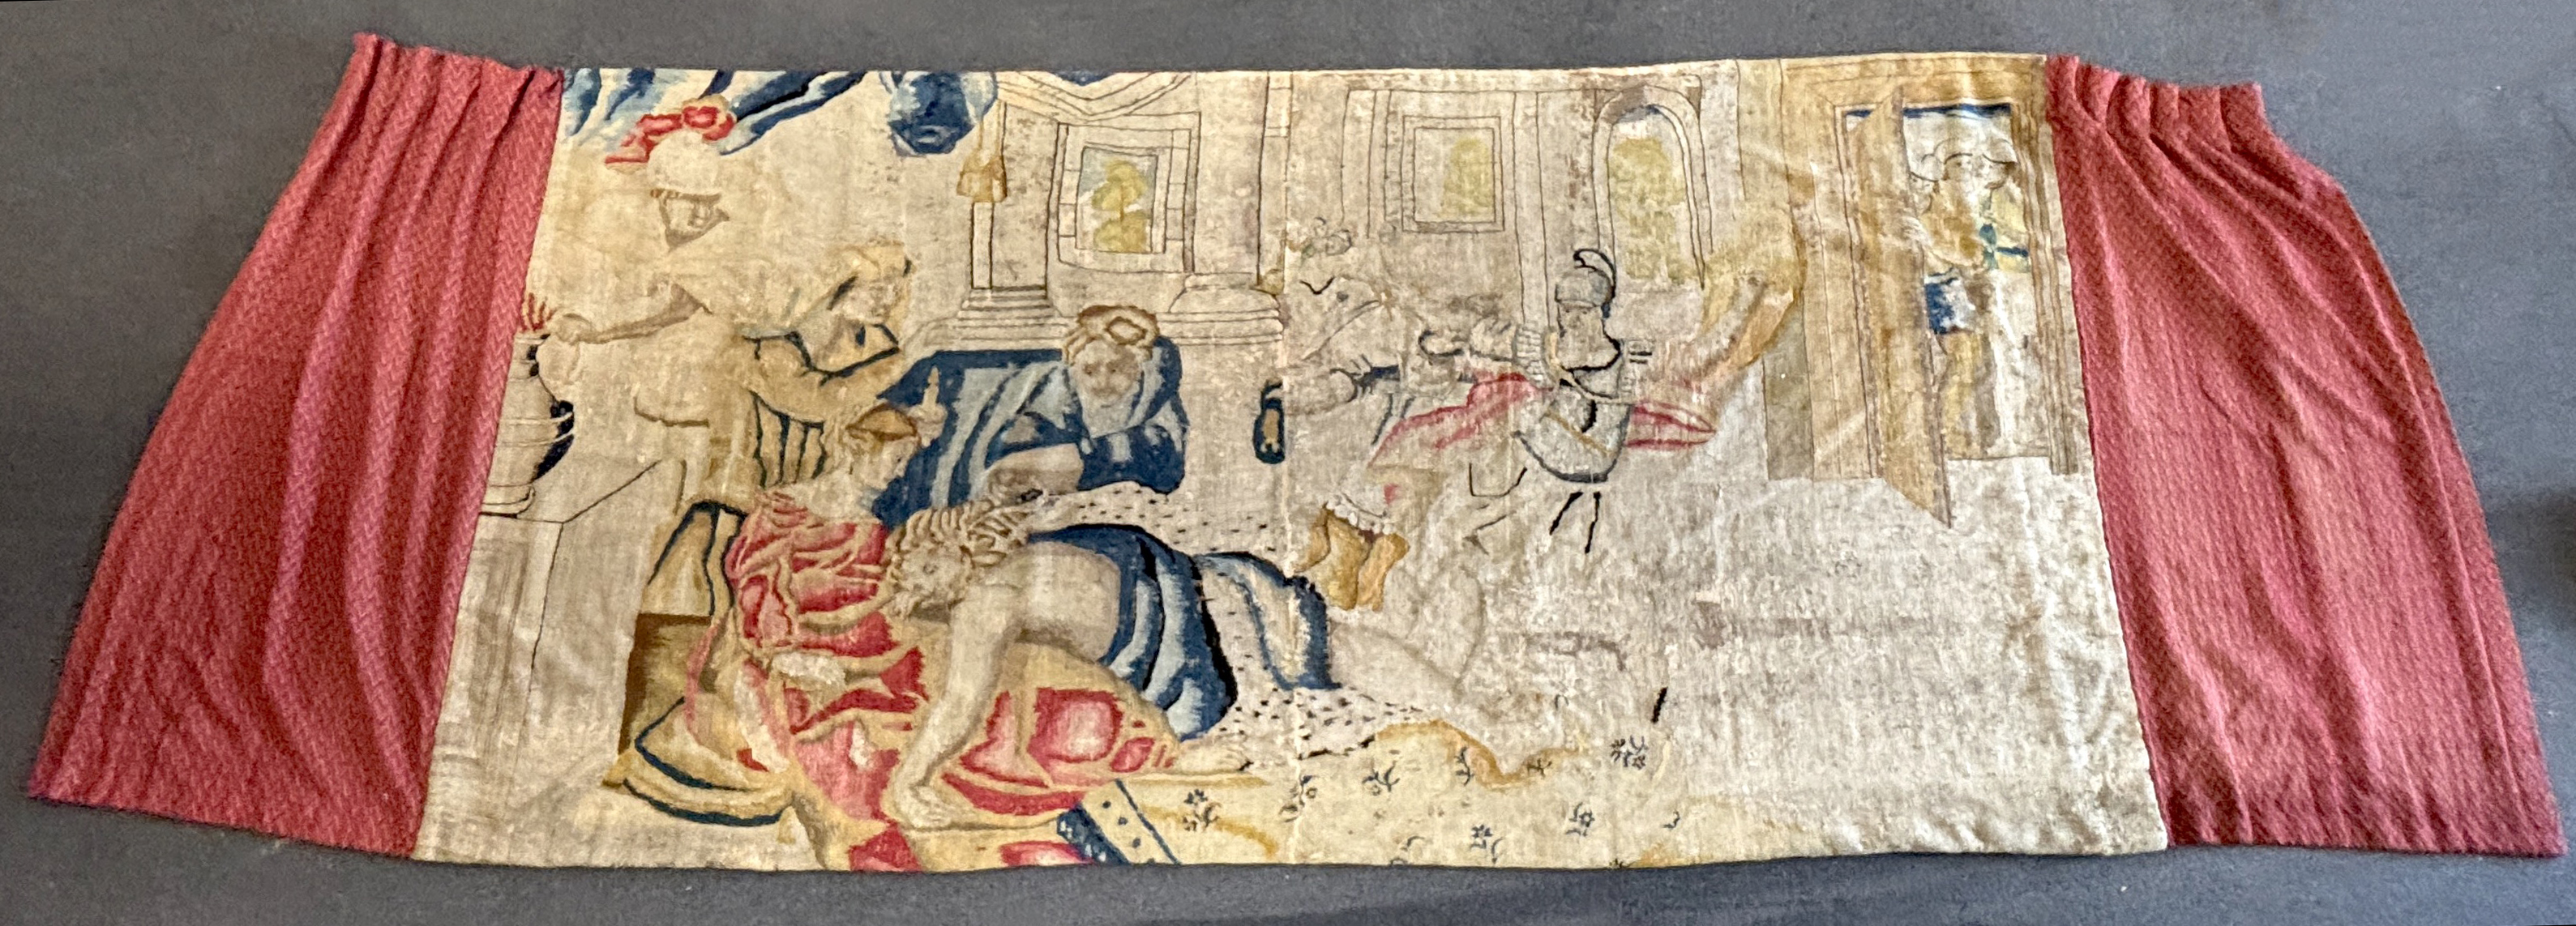 A large mid 17th century Flemish tapestry (possibly Antwerp) depicting Samson sleeping in the lap of Delilah while one of the Philistines is cutting off his locks, after the painting by Rubens. Cut in half, then re joine